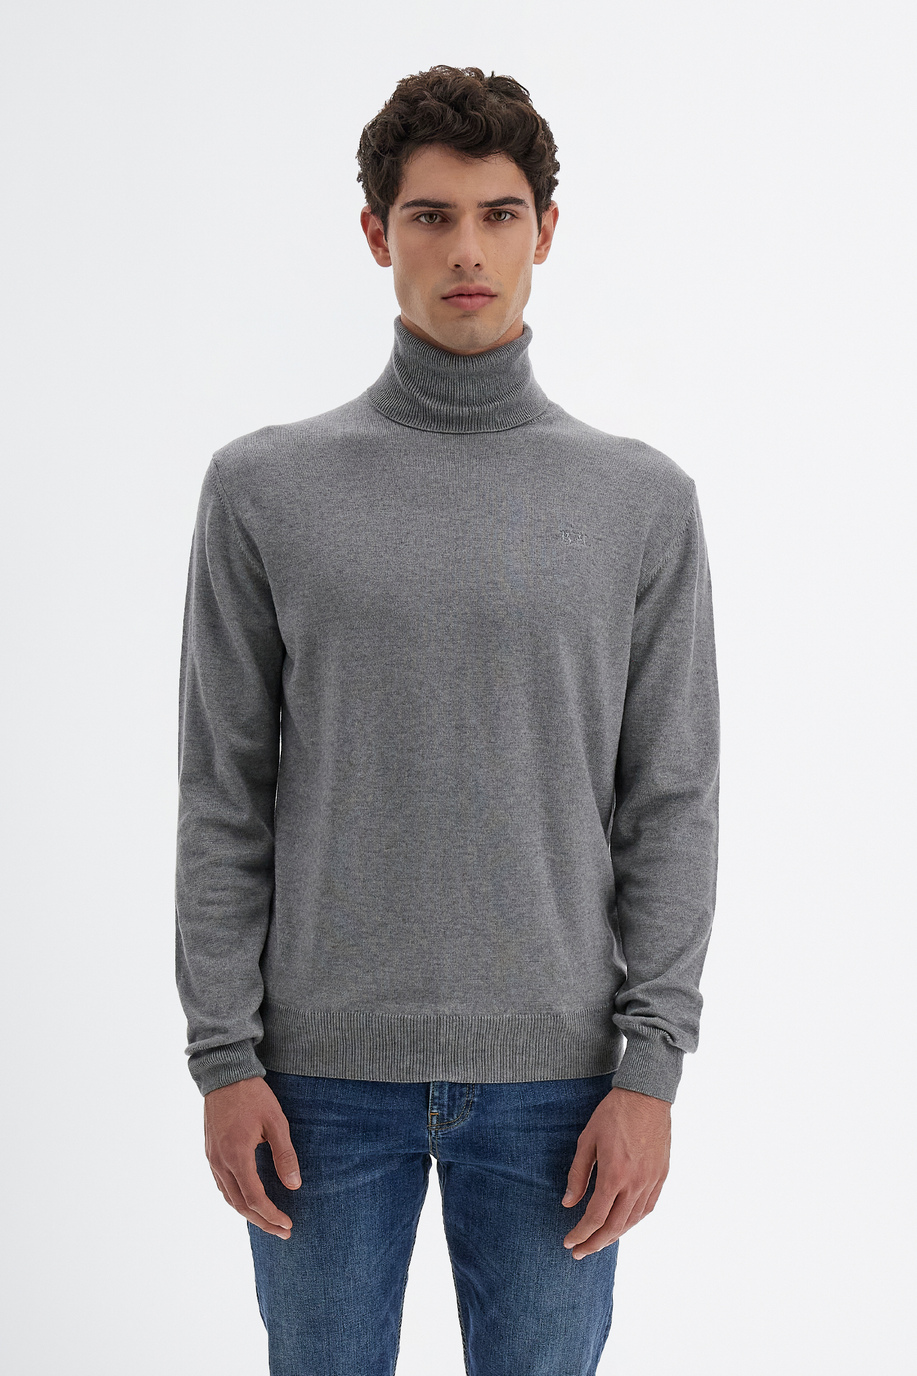 Men’s sweater with long sleeves high neck in cotton and wool blend regular fit - Knitwear | La Martina - Official Online Shop